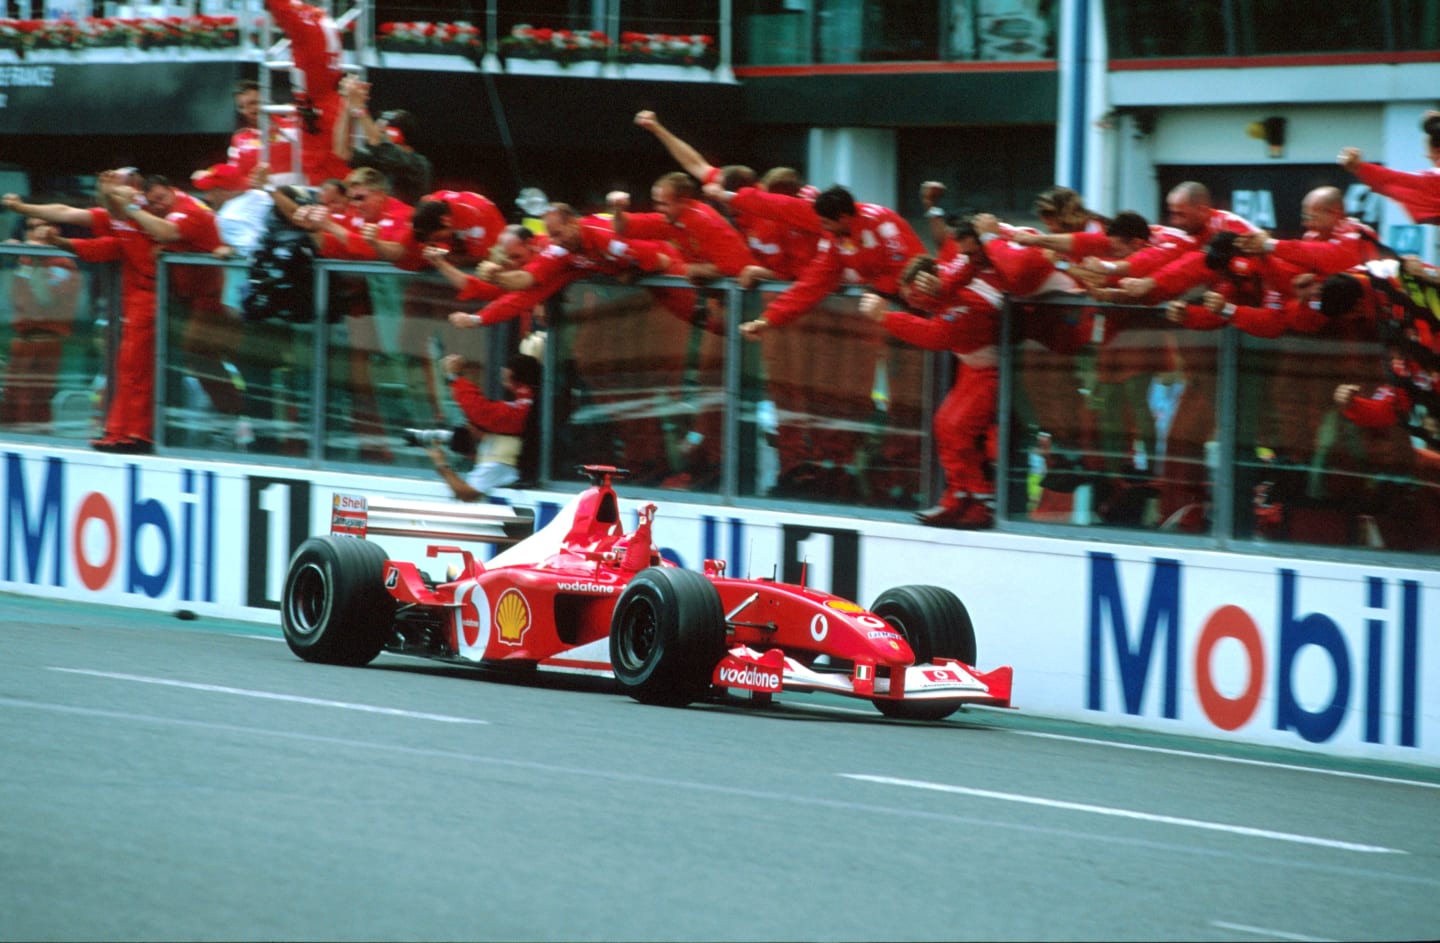 Michael Schumacher (GER) Ferrari F2002, crosses the line to win the race and claim his fifth F1